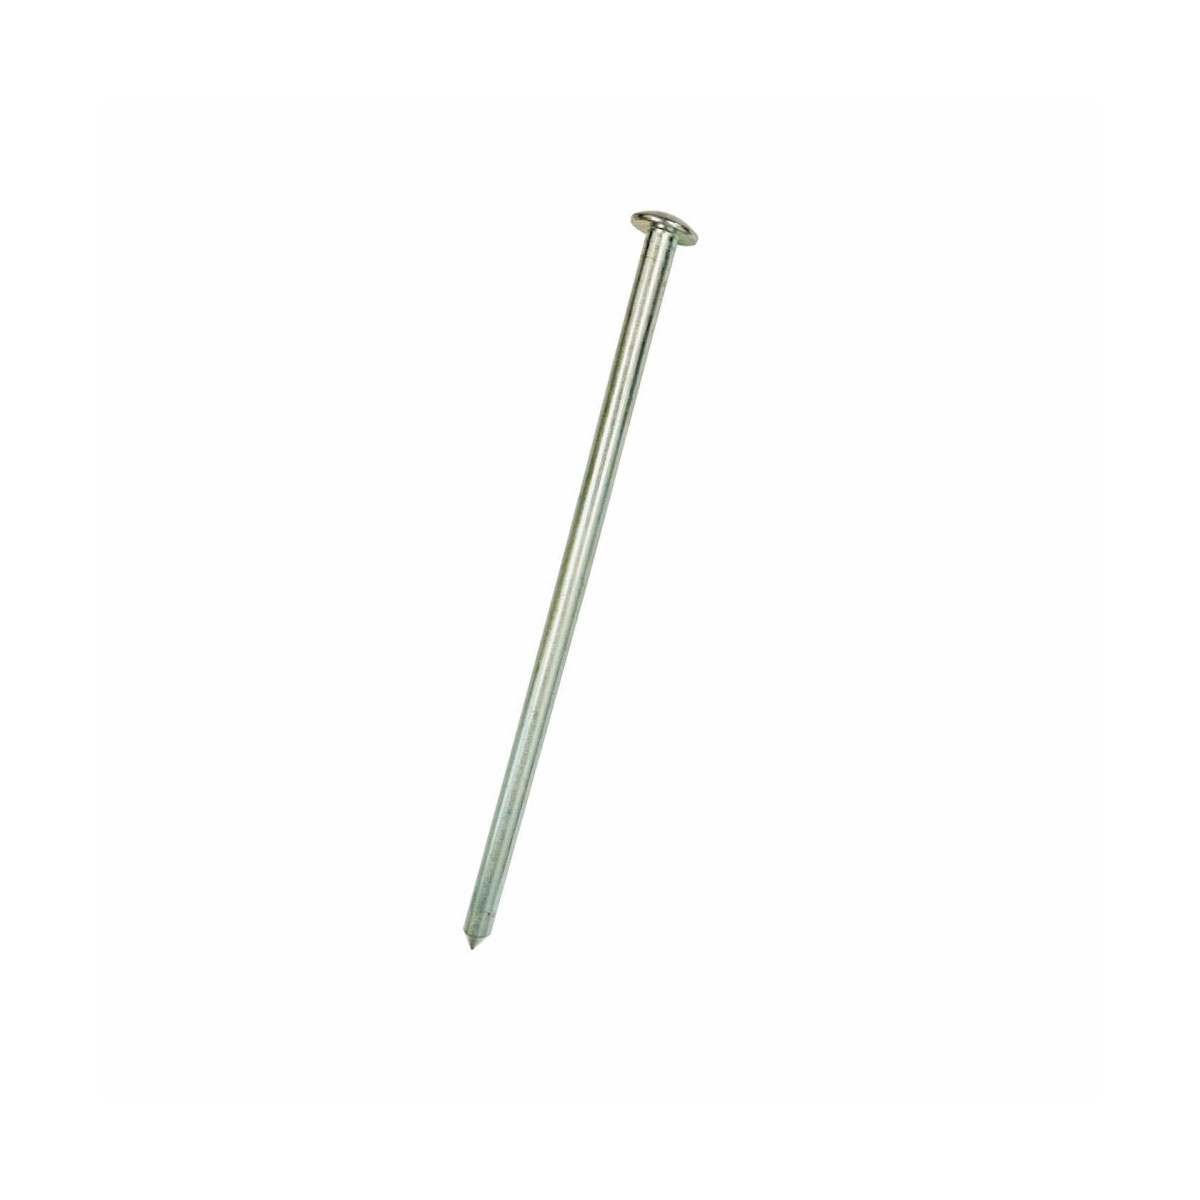 Buy Road Spike 300mm Zinc Plated in Fixings & Installation Products available at Astrolift NZ